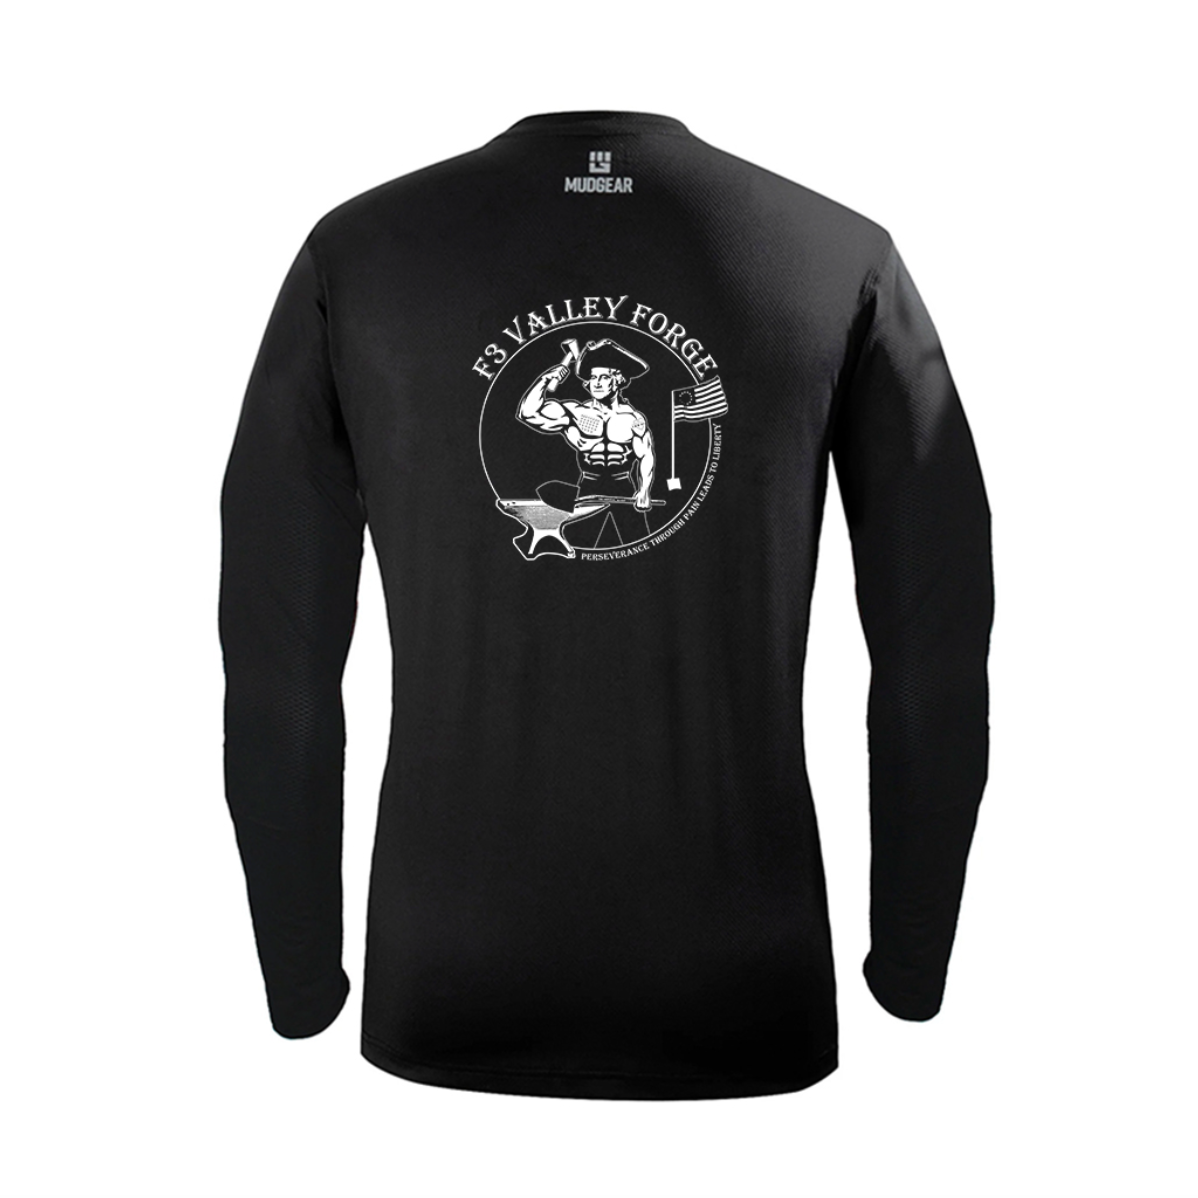 CLEARANCE ITEM - F3 Valley Forge  - MudGear Fitted Performance Shirt VX - Long Sleeve (Black)